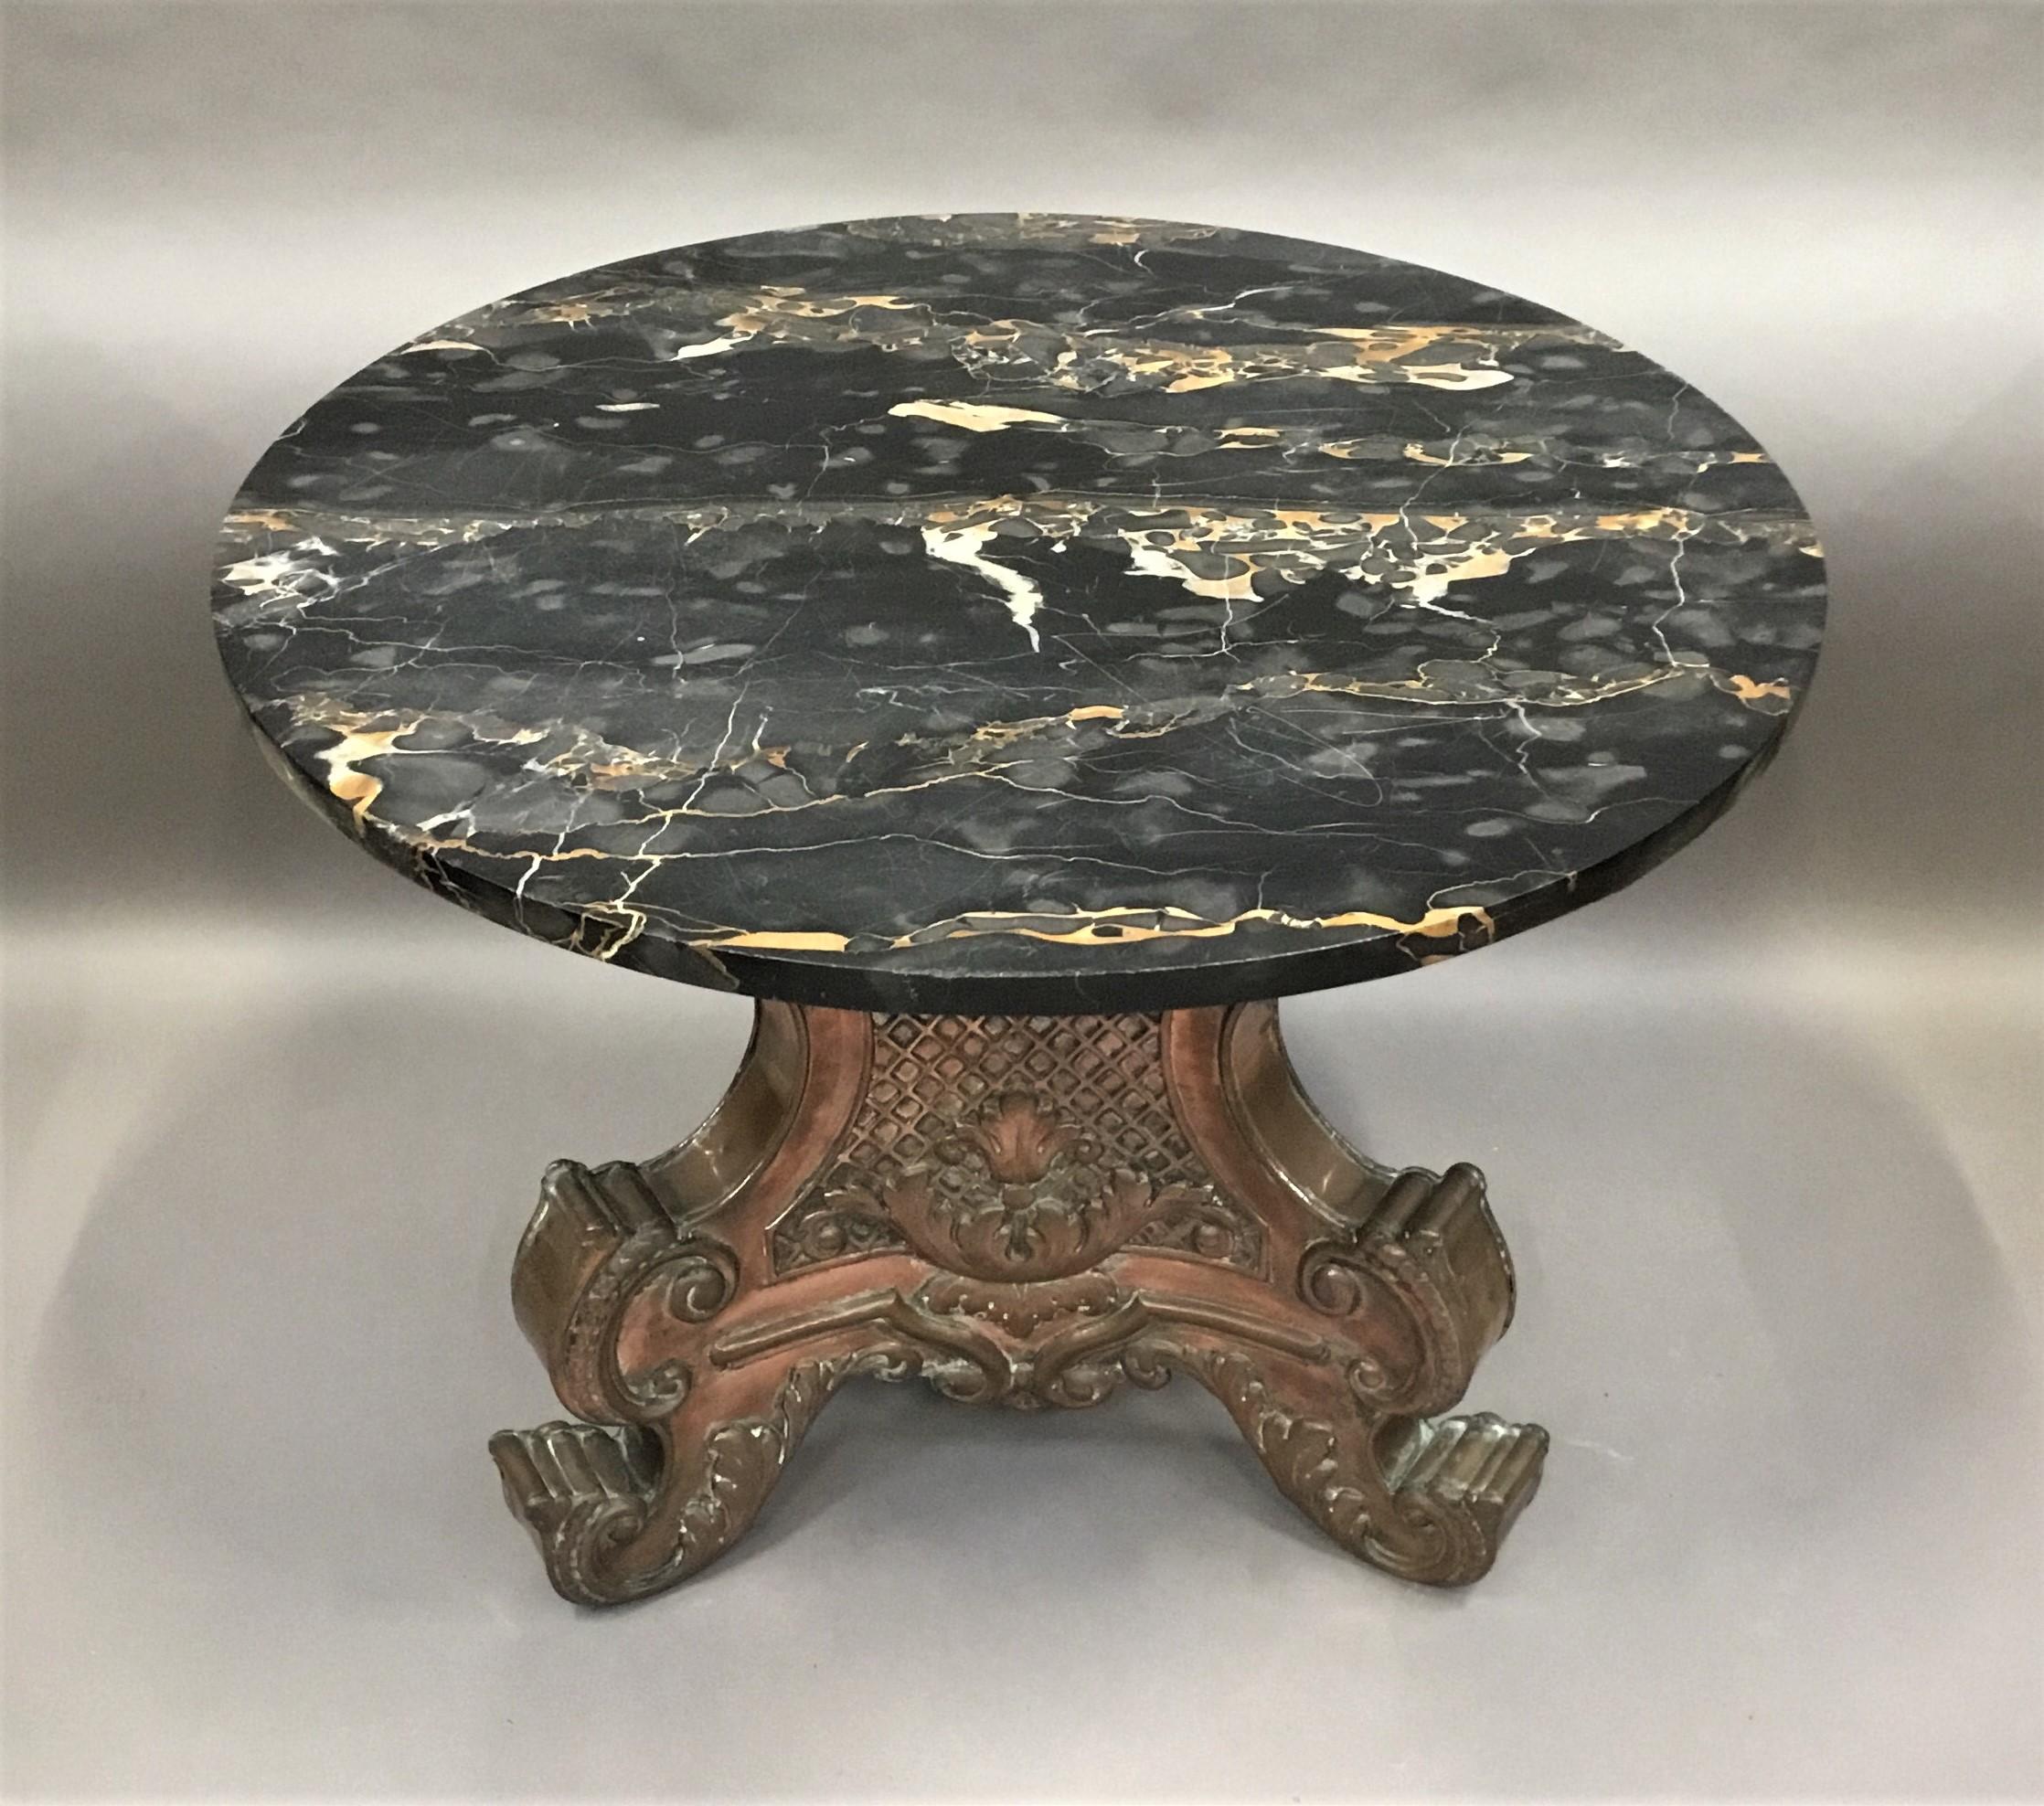 20th Century Italian Copper and Marble Low Centre Table / Coffee Table B Battioli For Sale